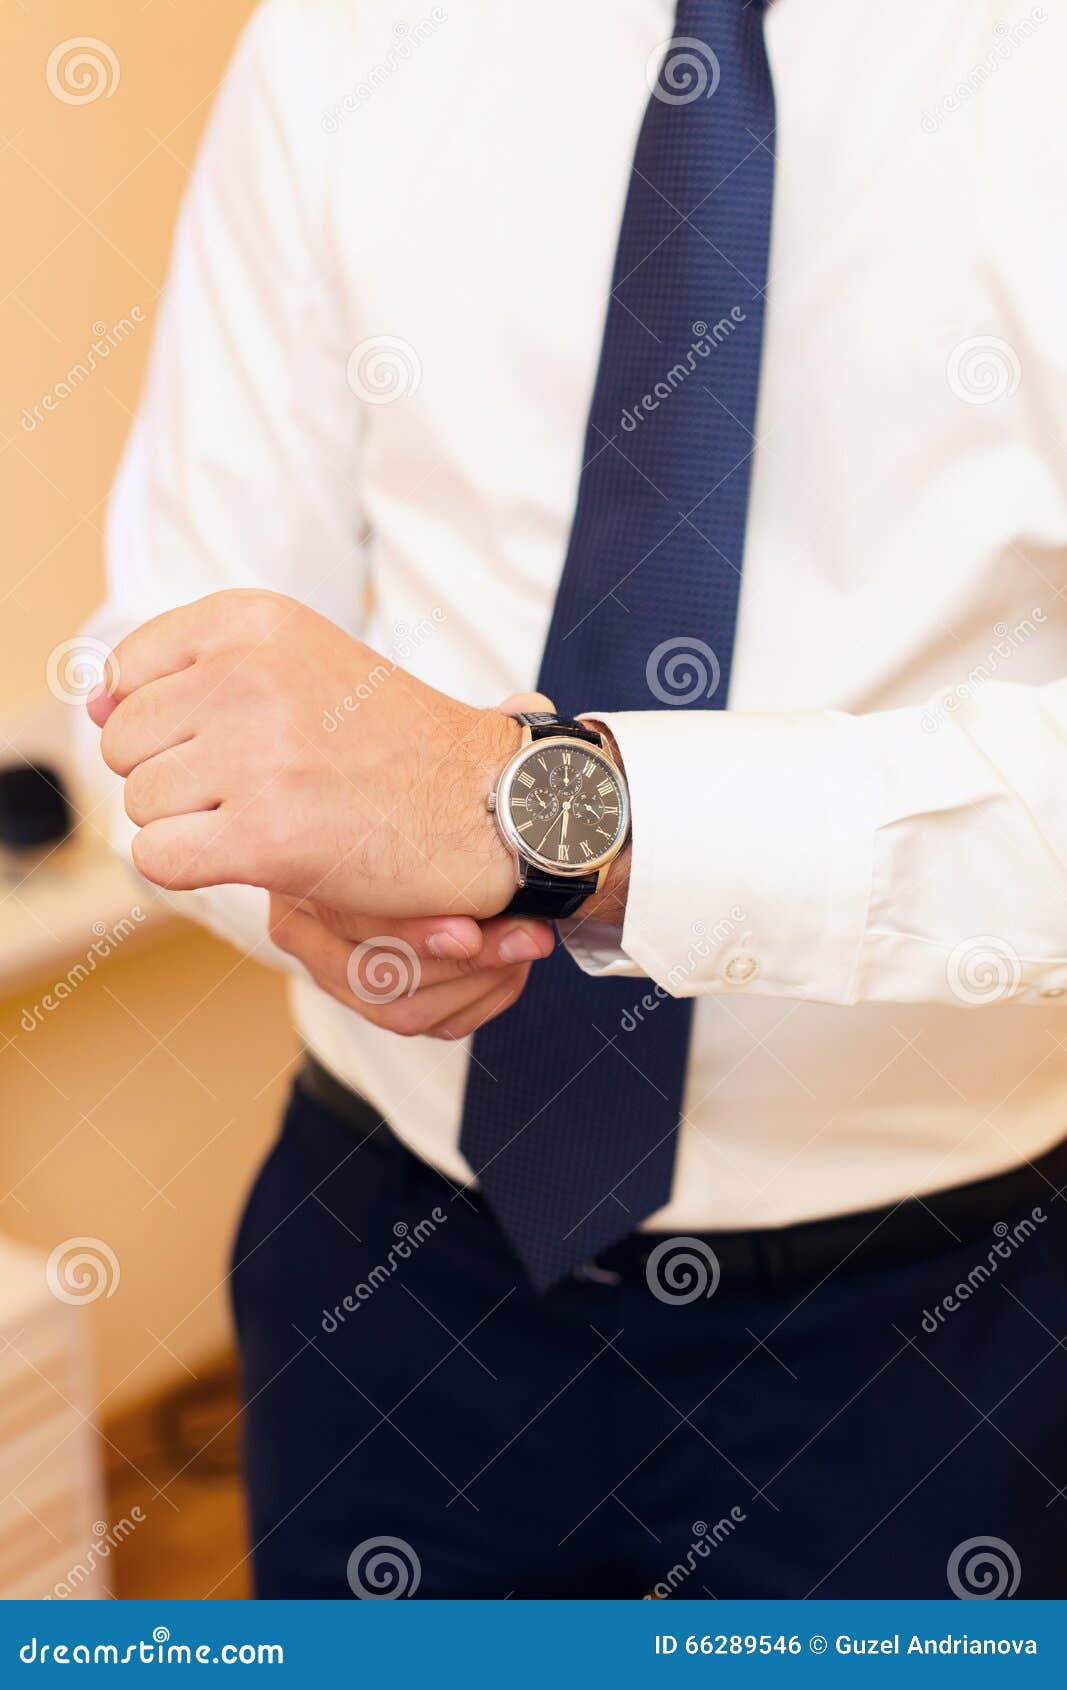 Watch on a hand at the man stock photo. Image of ceremony - 66289546